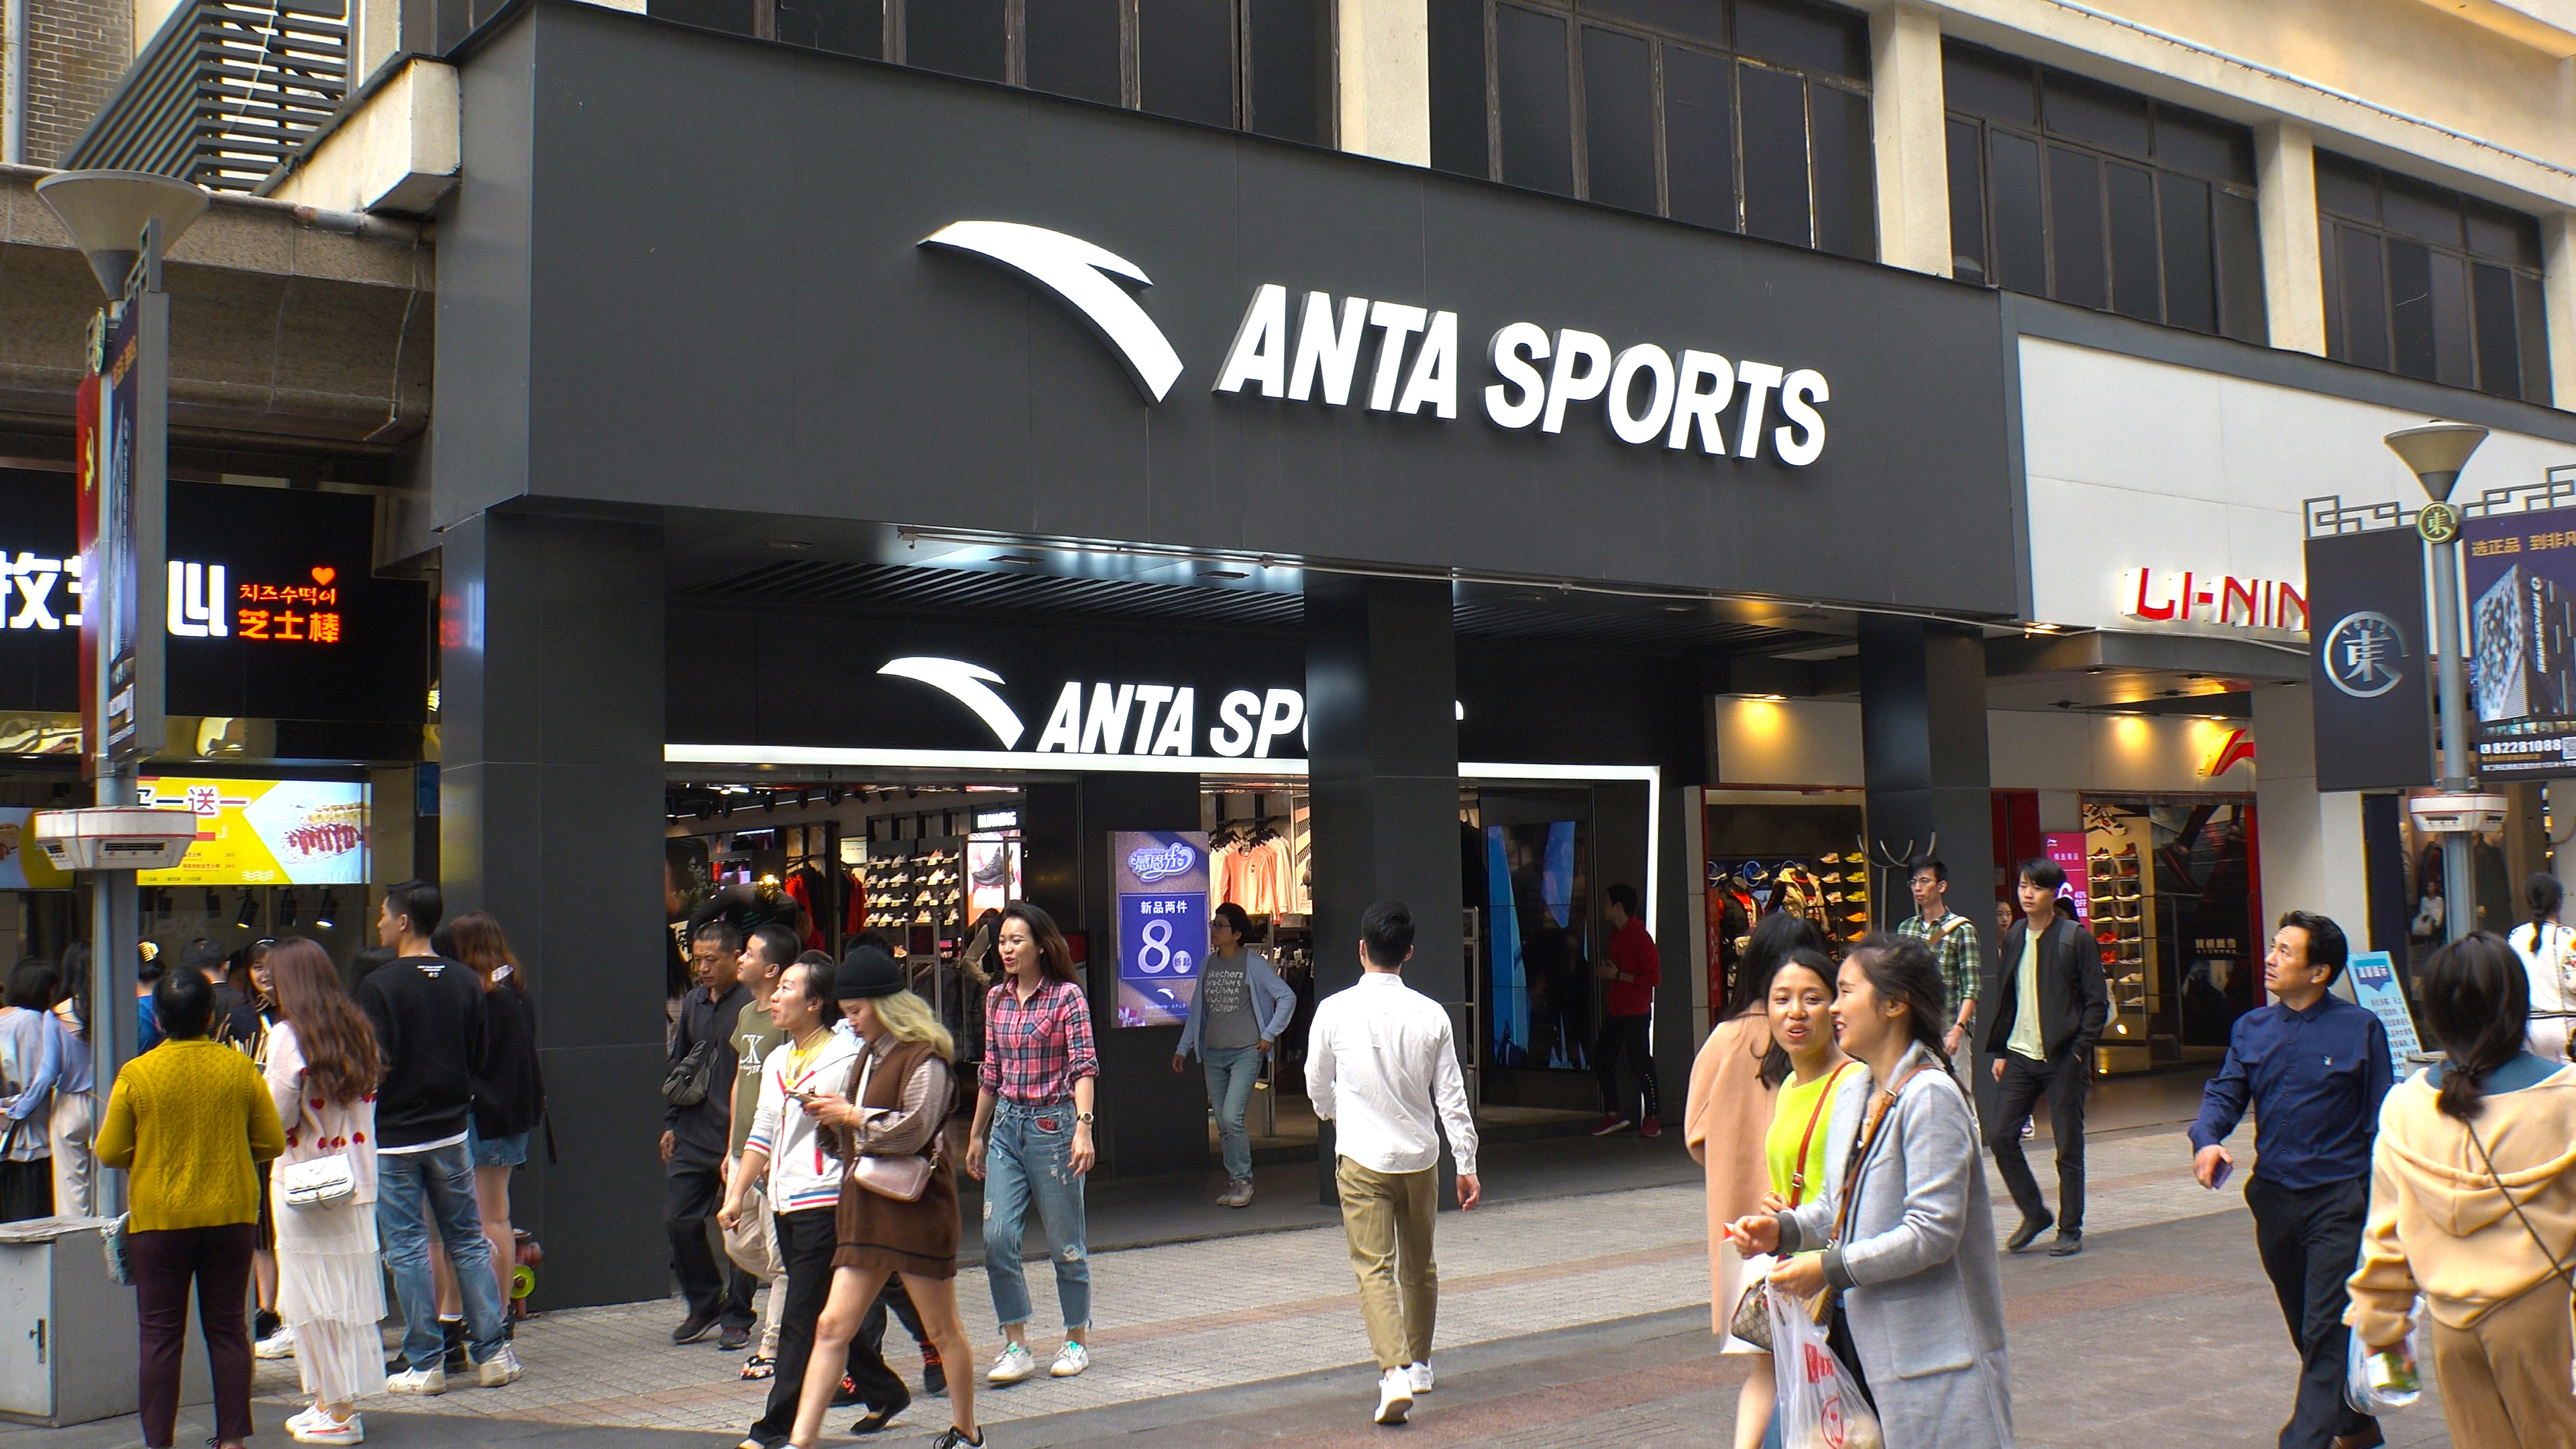 Anta may sell shares of Amer, the owner of Arc'teryx, Atomic, Salomon, Wilson and other sports brands | South China Morning Post